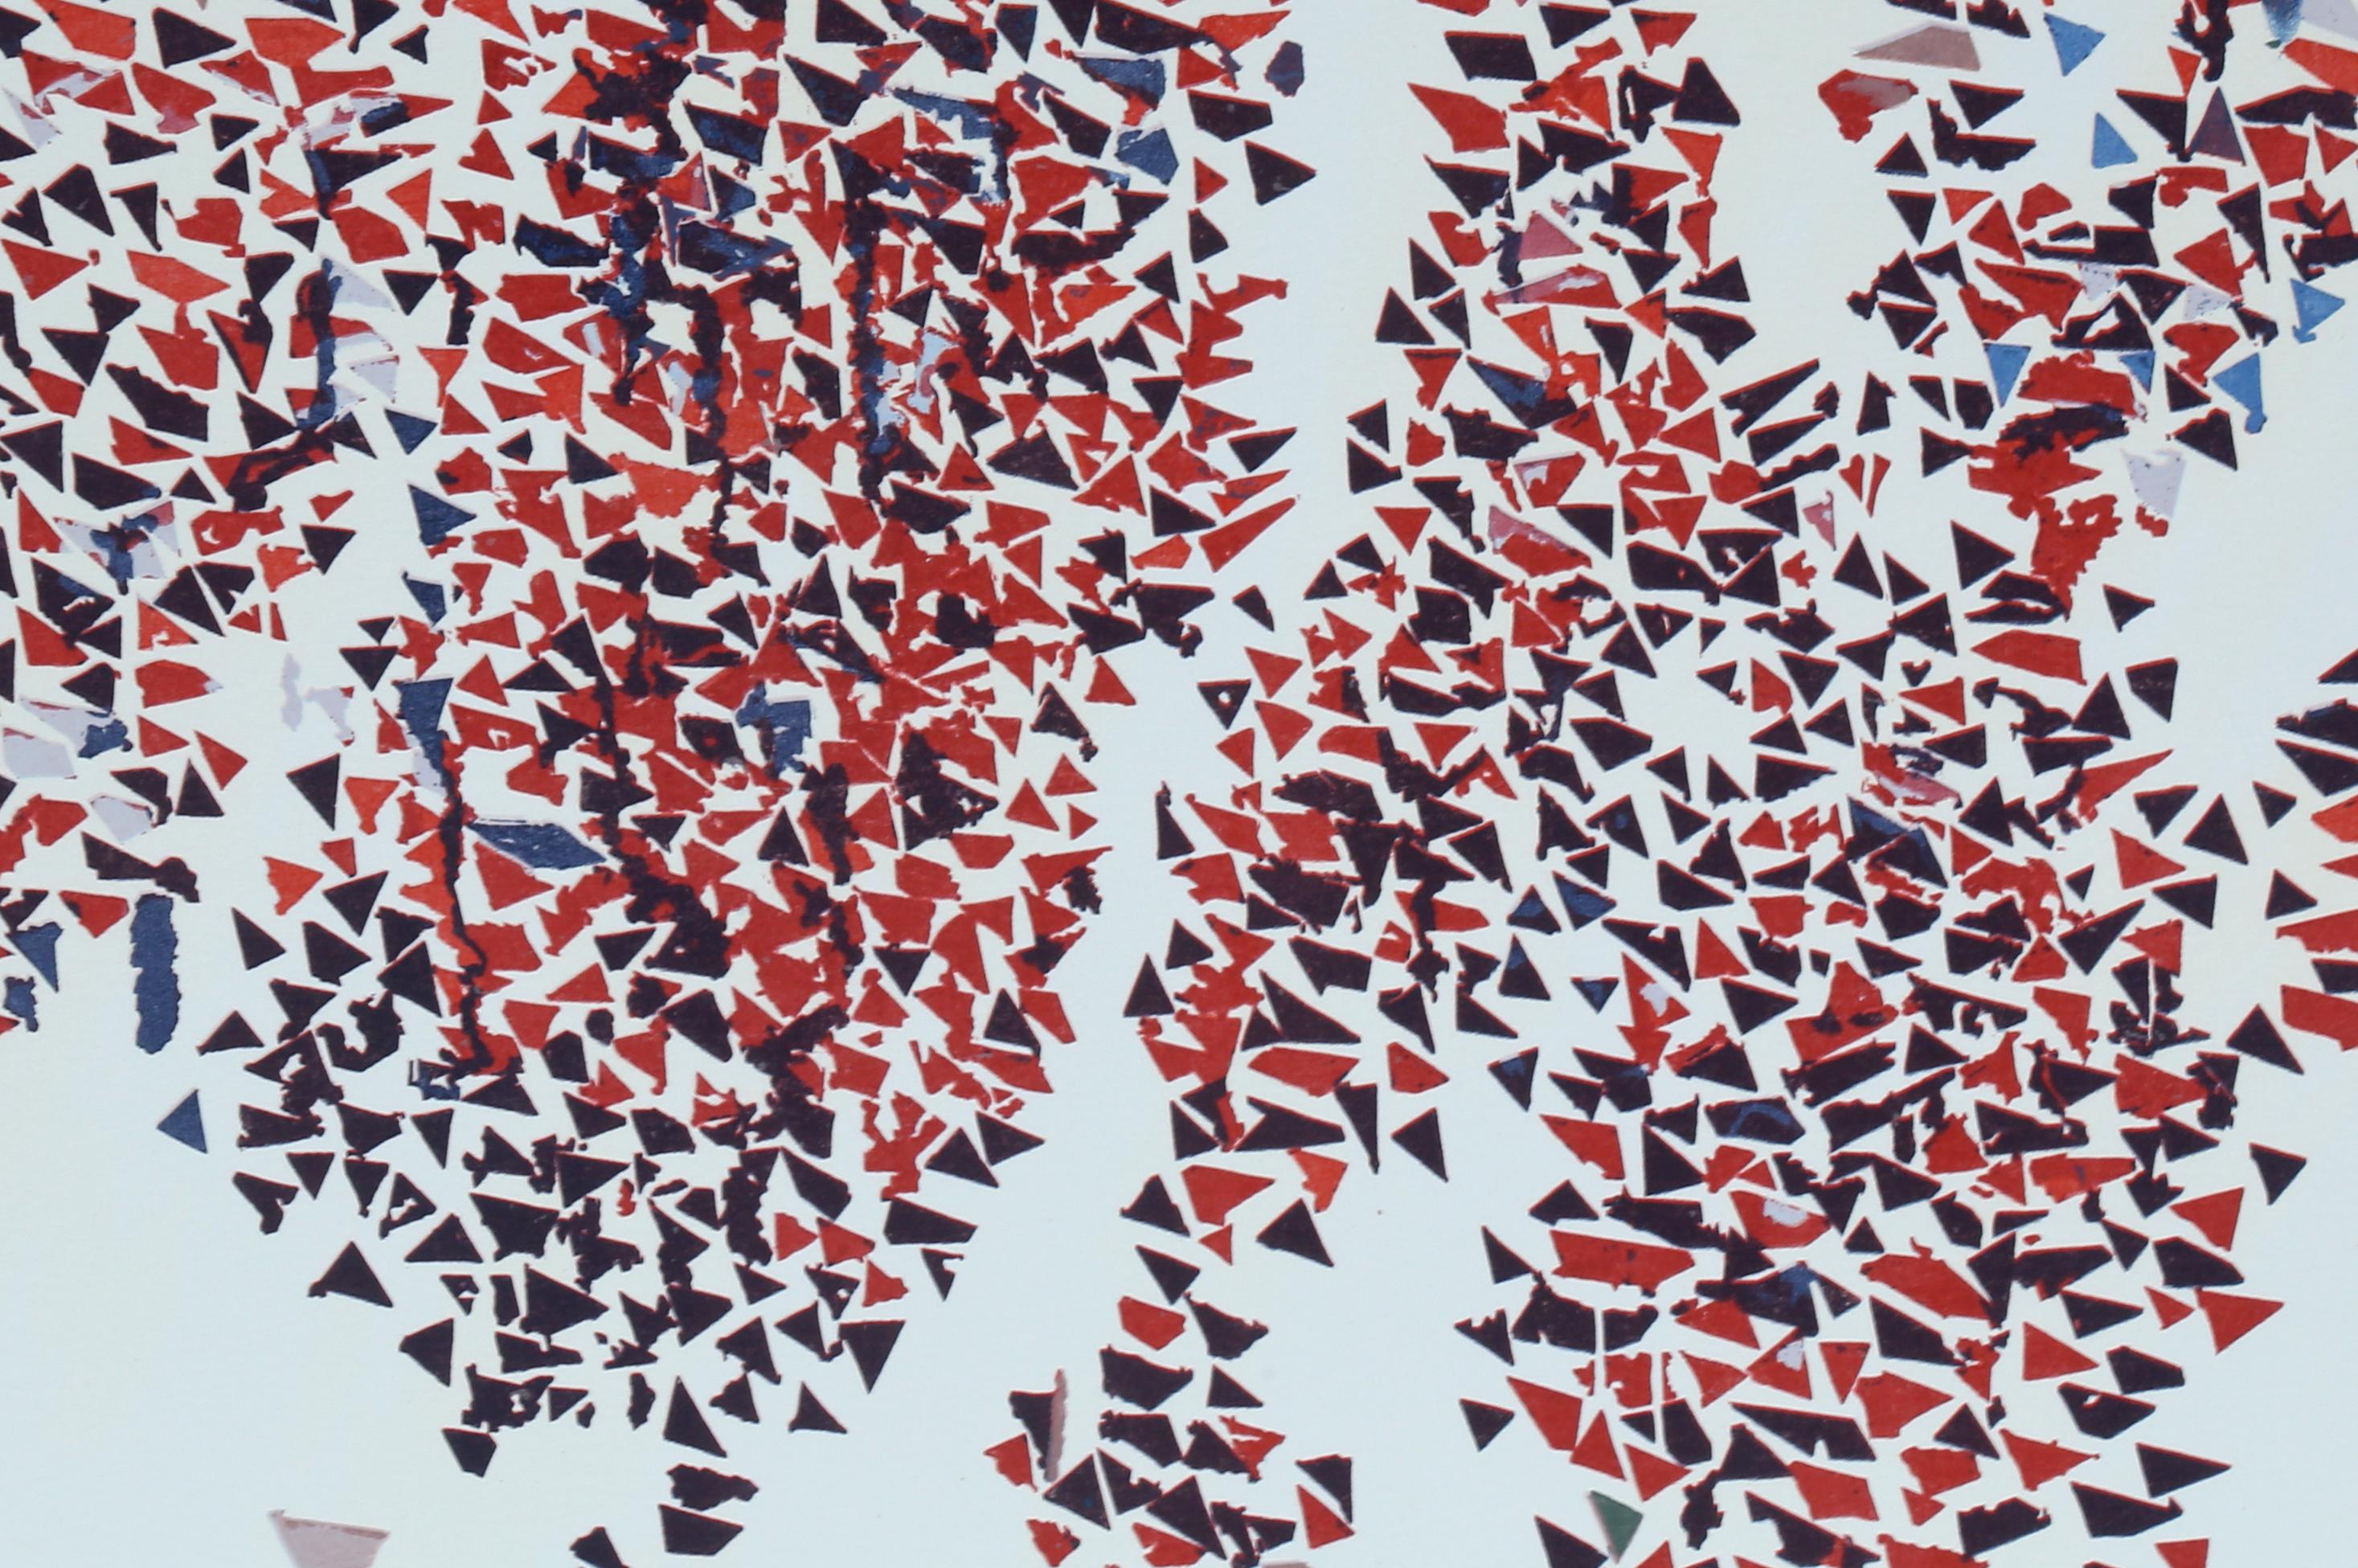 Autumn Leaves Always, Abstract Expressionist Screenprint by Robert Goodnough - Print by Robert Arthur Goodnough